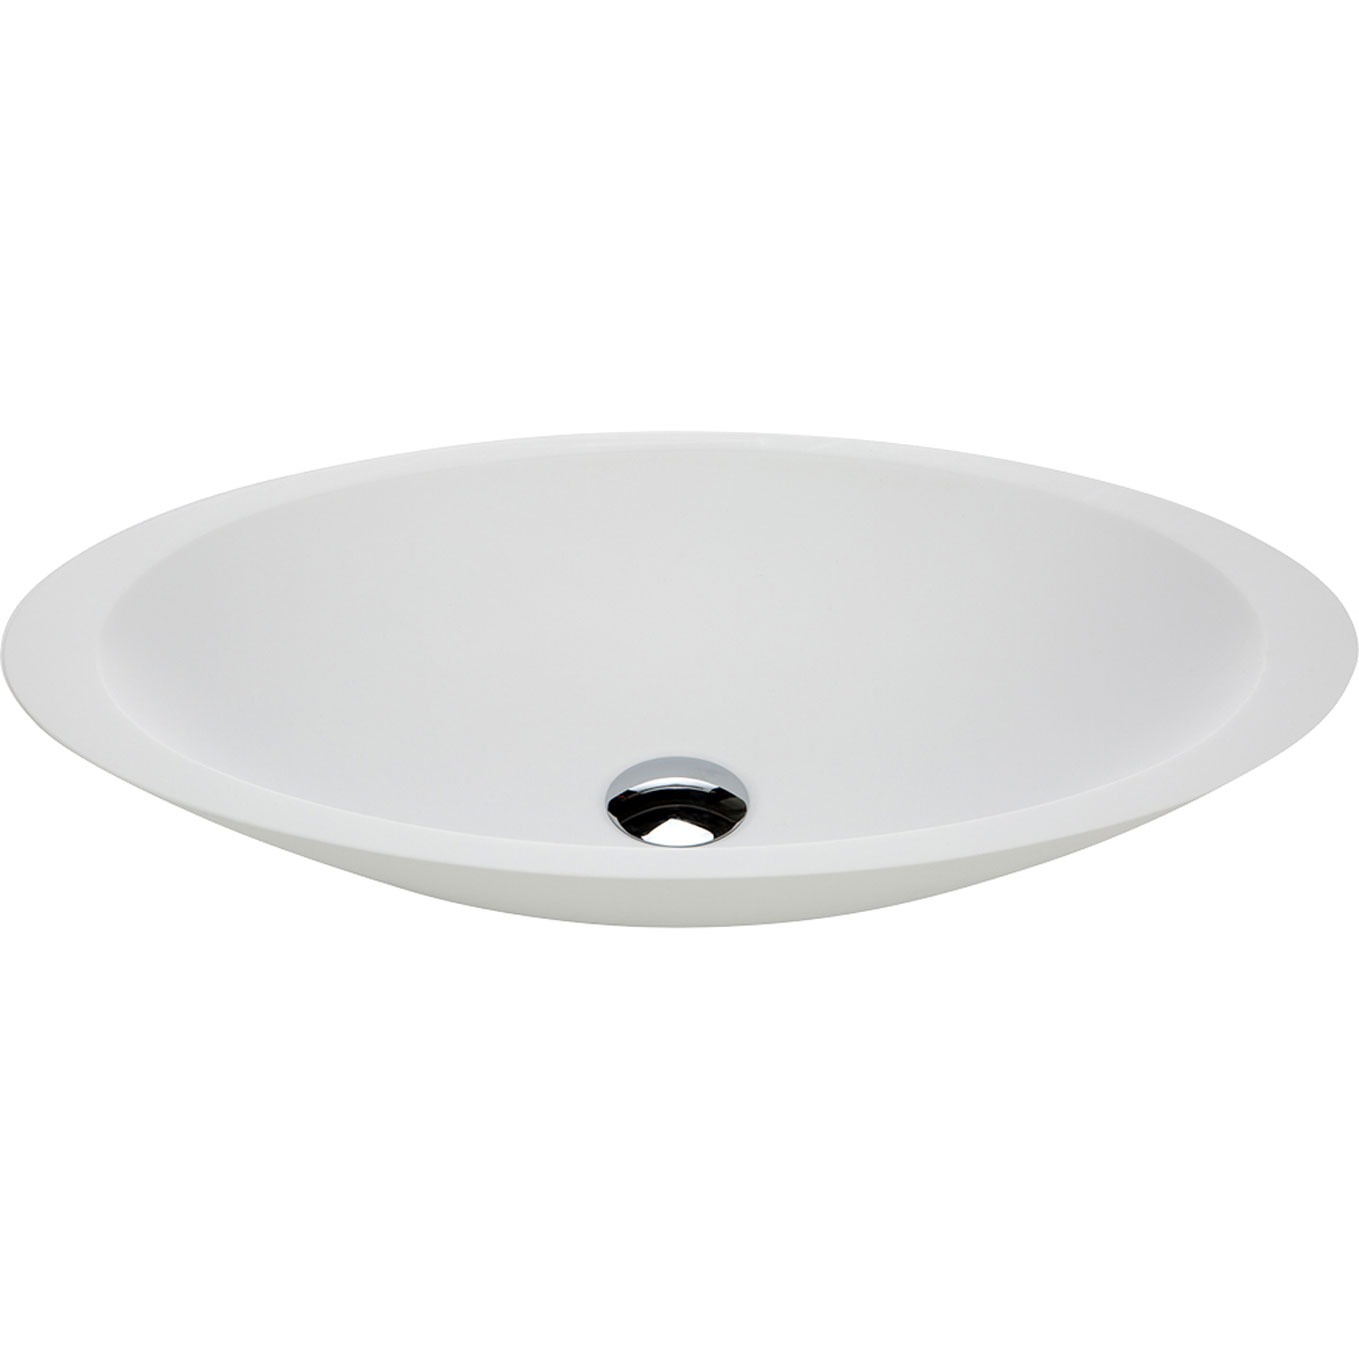 FIENZA CSB01 BAHAMA SOLID SURFACE OVAL ABOVE COUNTER BASIN MATTE WHITE